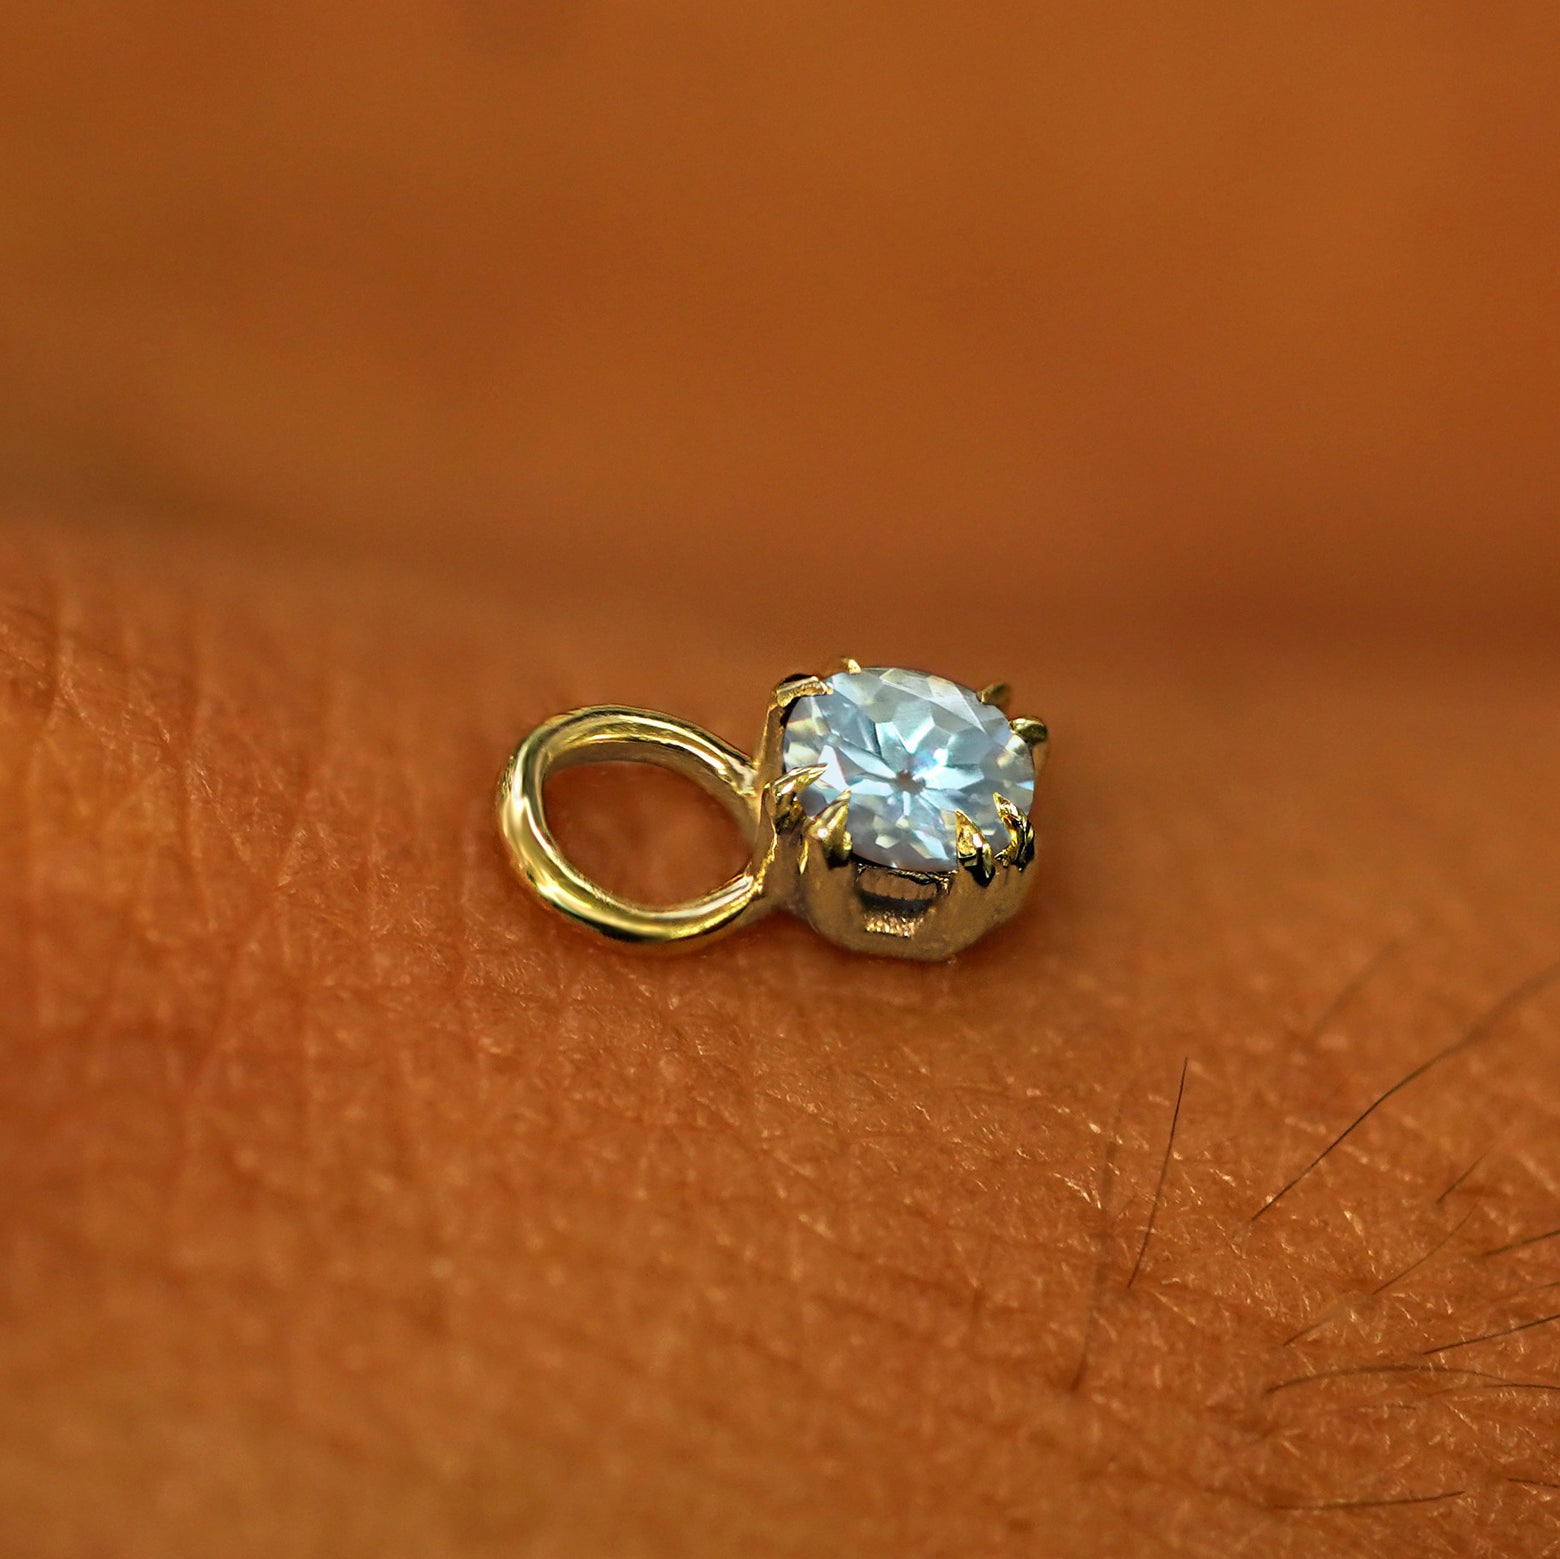 A solid yellow gold Aquamarine Charm for earring resting on the back of a model's hand